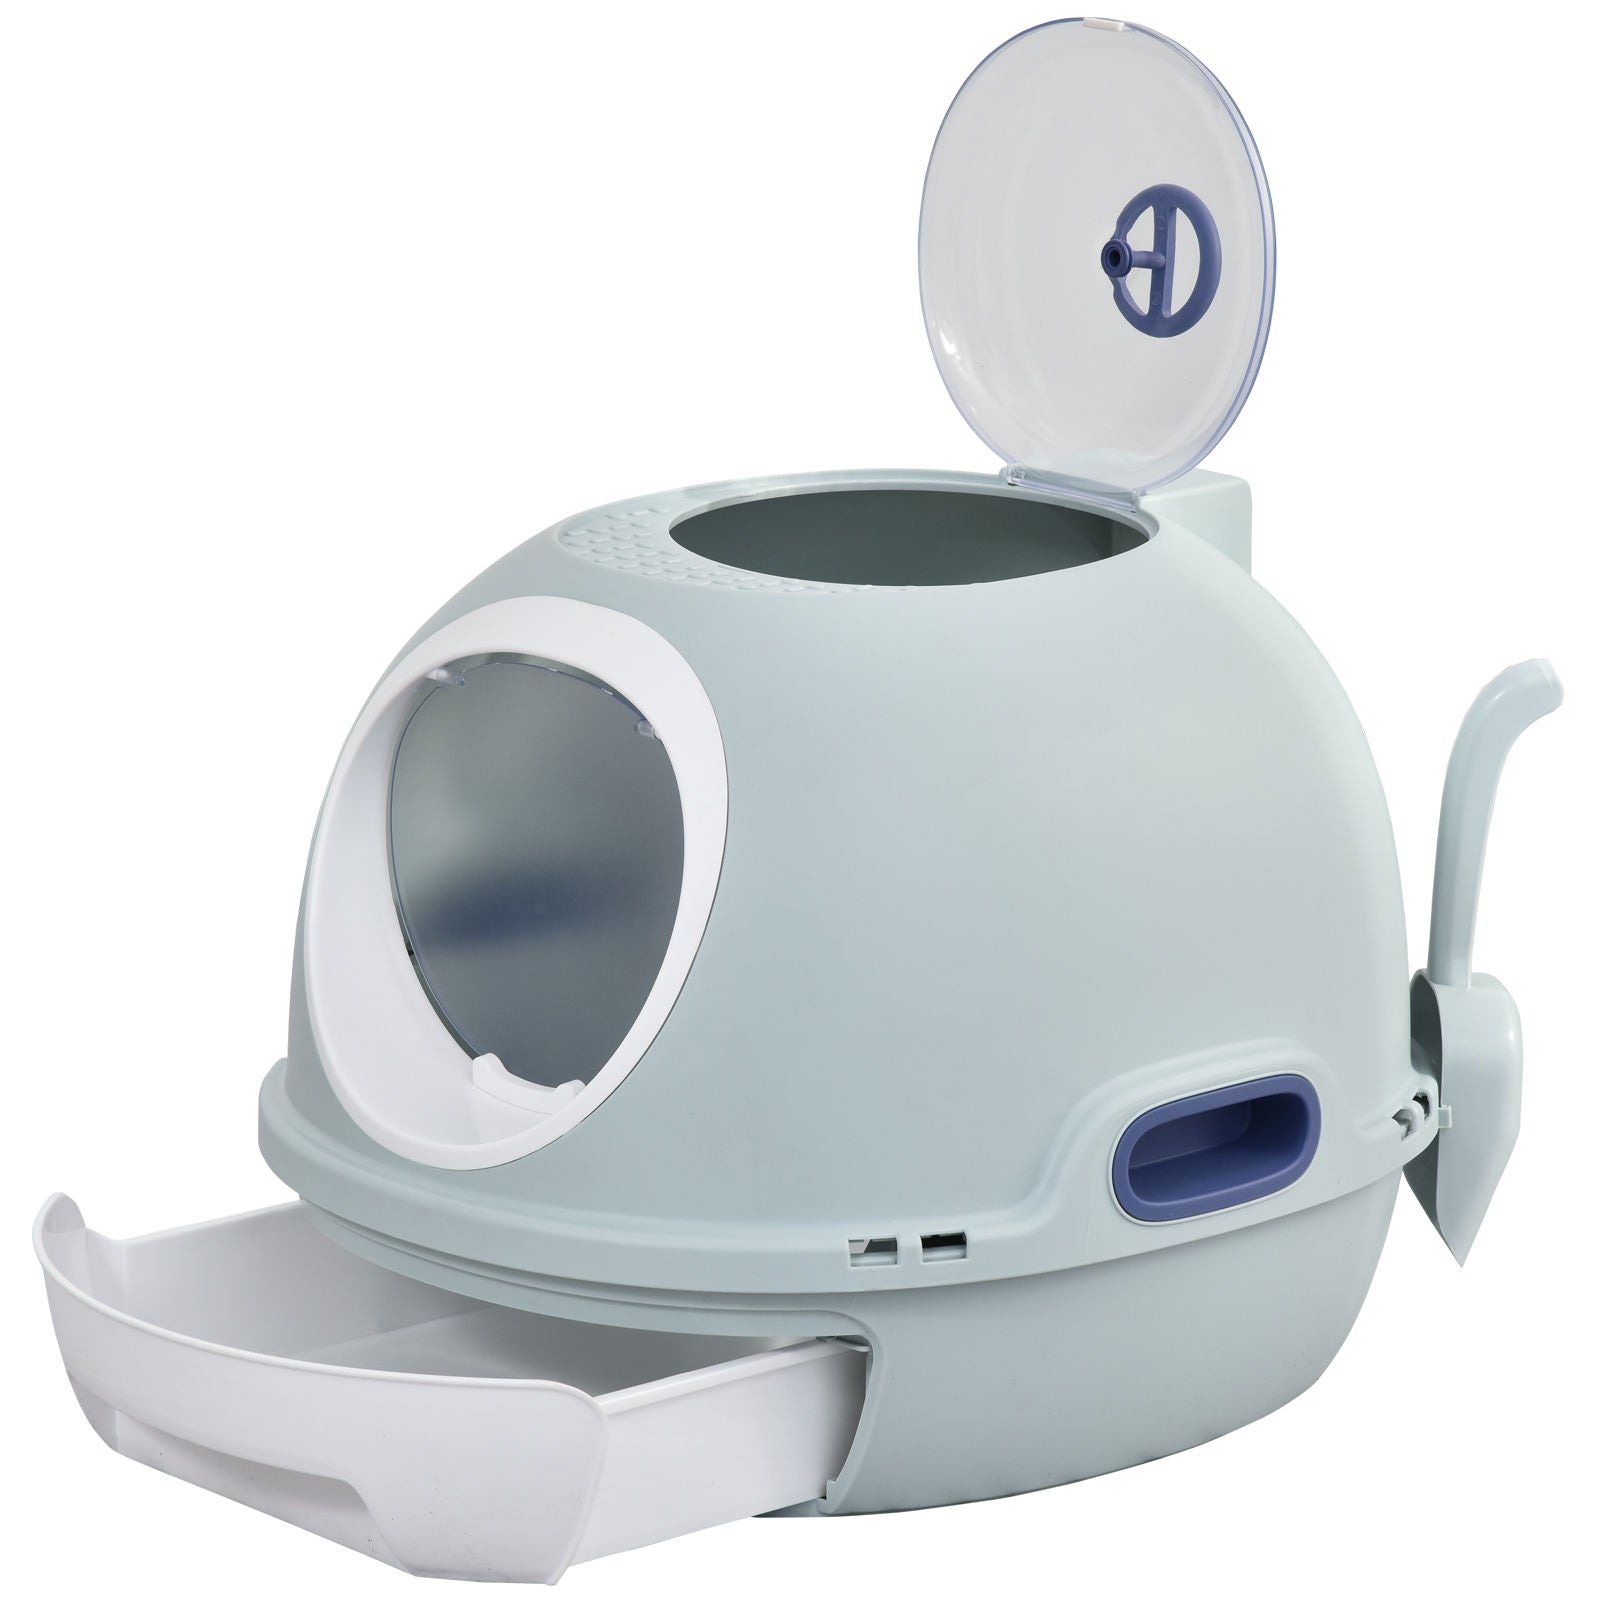 Nancy's Punta Azul Cat Litter Box with Skylight, Litter Box with Base Plate, with Scoop, Portable